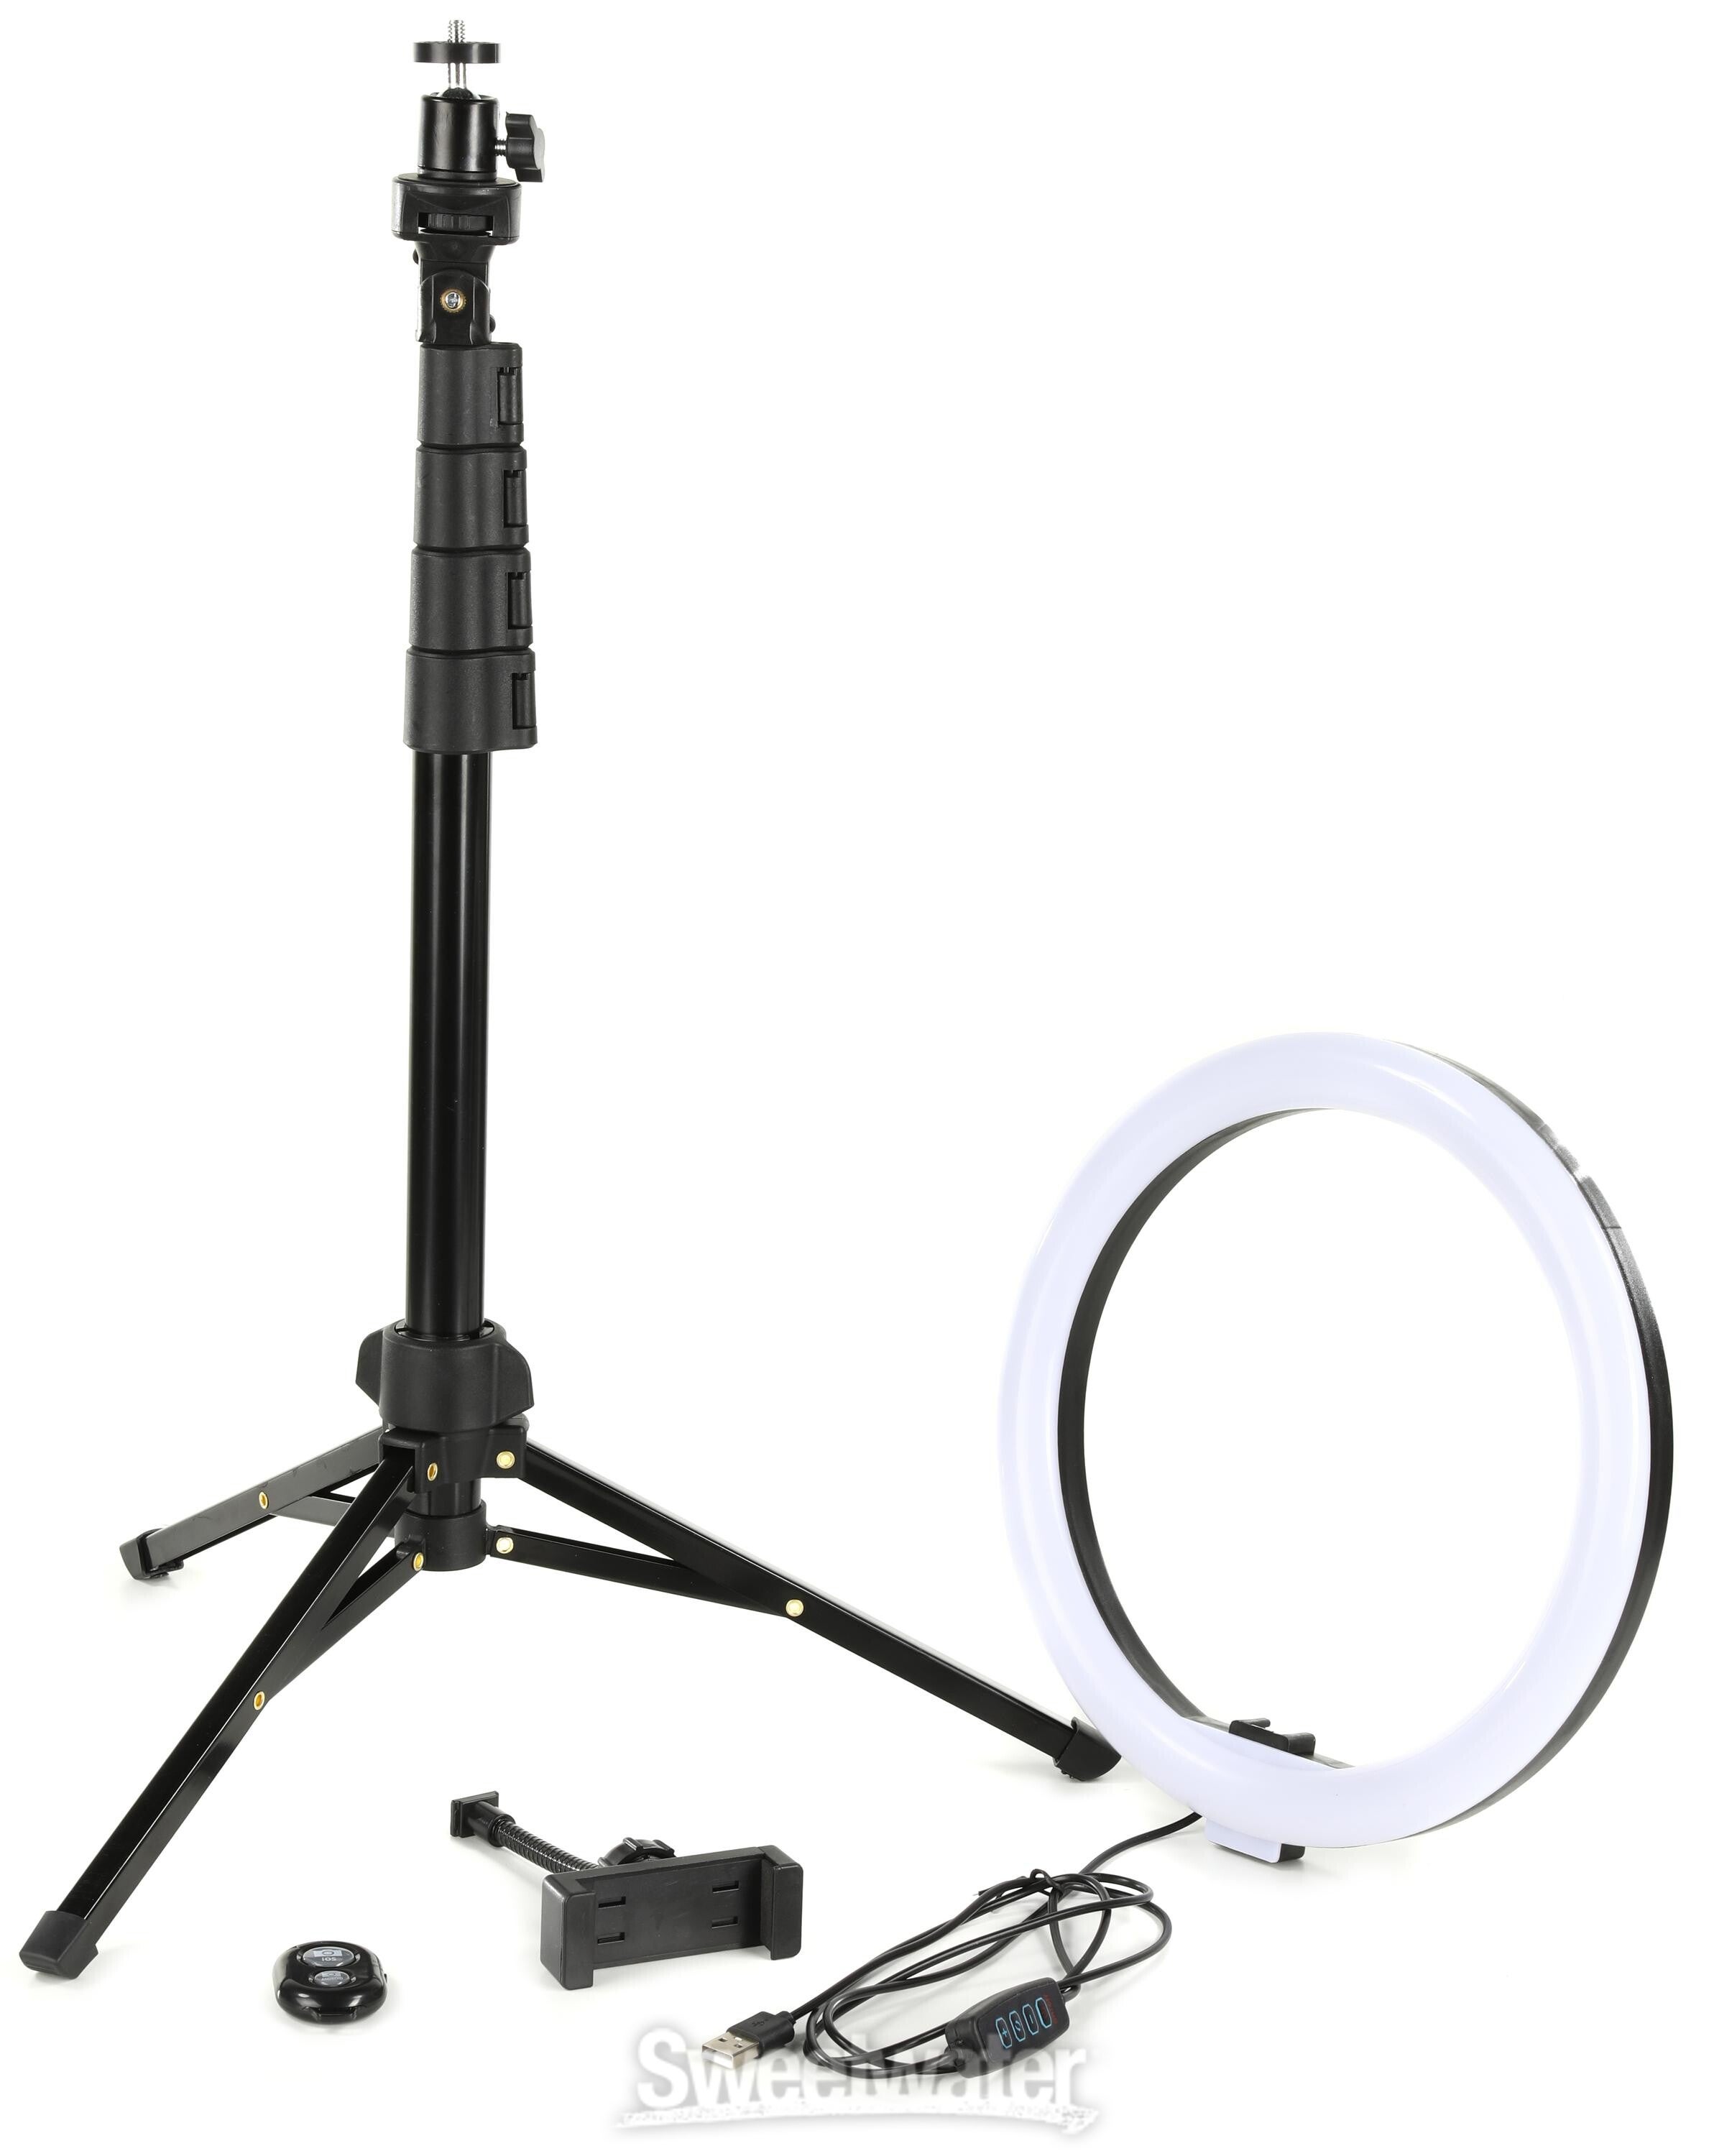 Yidoblo FC-480 RGBW SMD LED Ring Light Kit with Tripod, Mirror, Phone  Holder, Remote, Bag 95ra+ Battery Powered - China LED Ring Light RGB and  LED Ring Light 18inch Annular Lamp price |